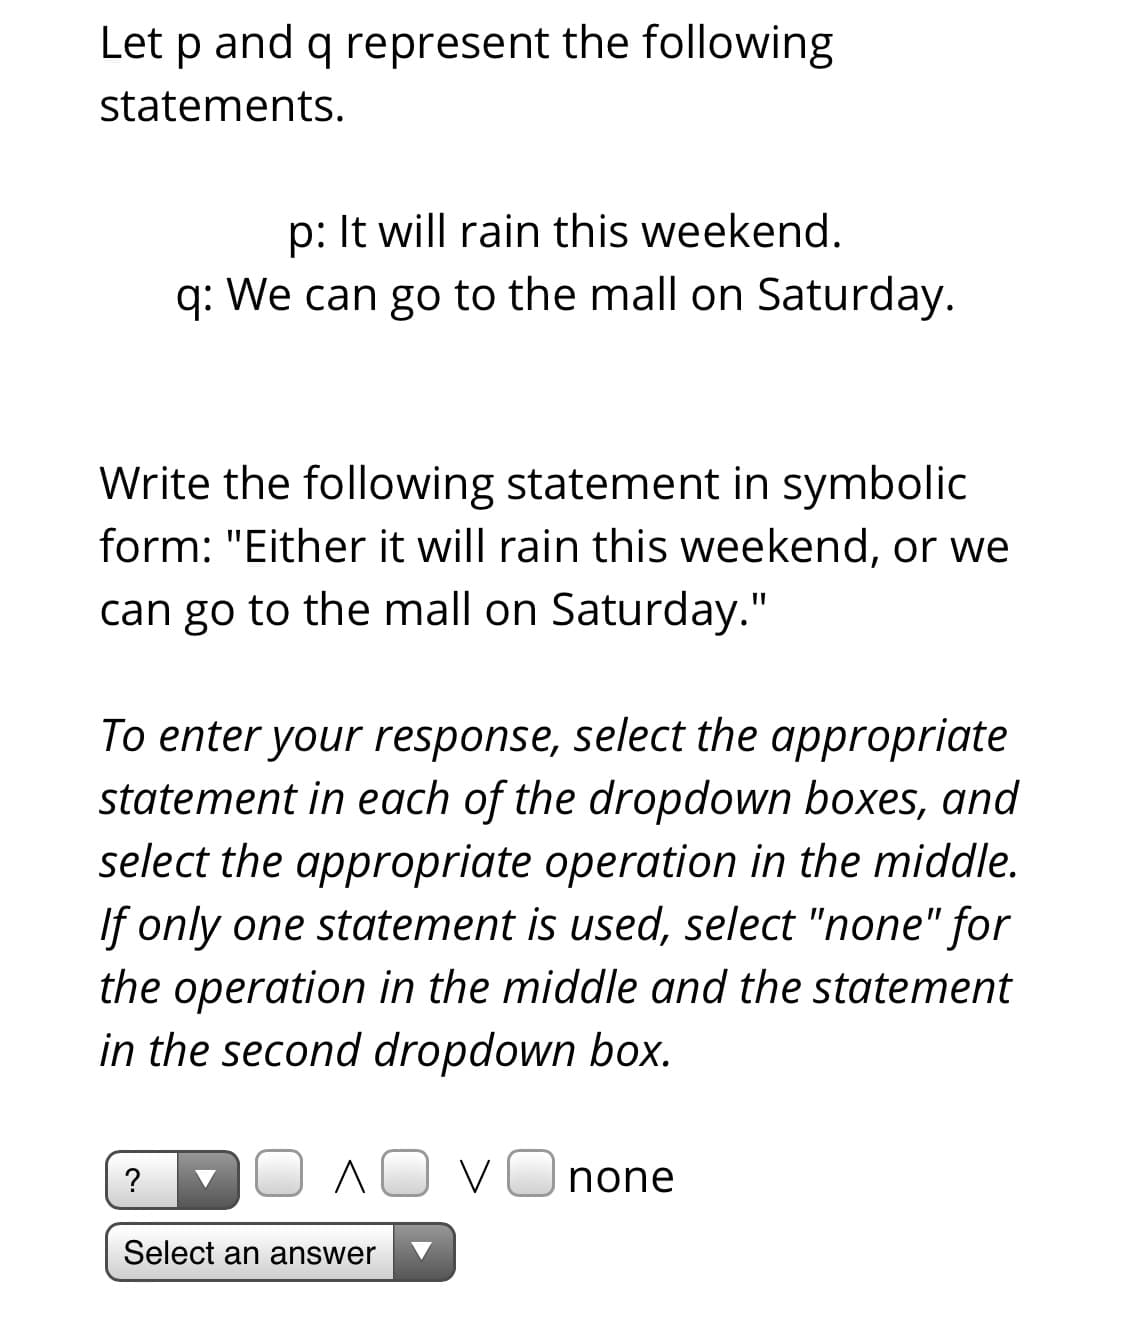 Let p and q represent the following
statements.
p: It will rain this weekend.
q: We can go to the mall on Saturday.
Write the following statement in symbolic
form: "Either it will rain this weekend, or we
can go to the mall on Saturday."
To enter your response, select the appropriate
statement in each of the dropdown boxes, and
select the appropriate operation in the middle.
If only one statement is used, select "none" for
the operation in the middle and the statement
in the second dropdown box.
none
Select an answer
